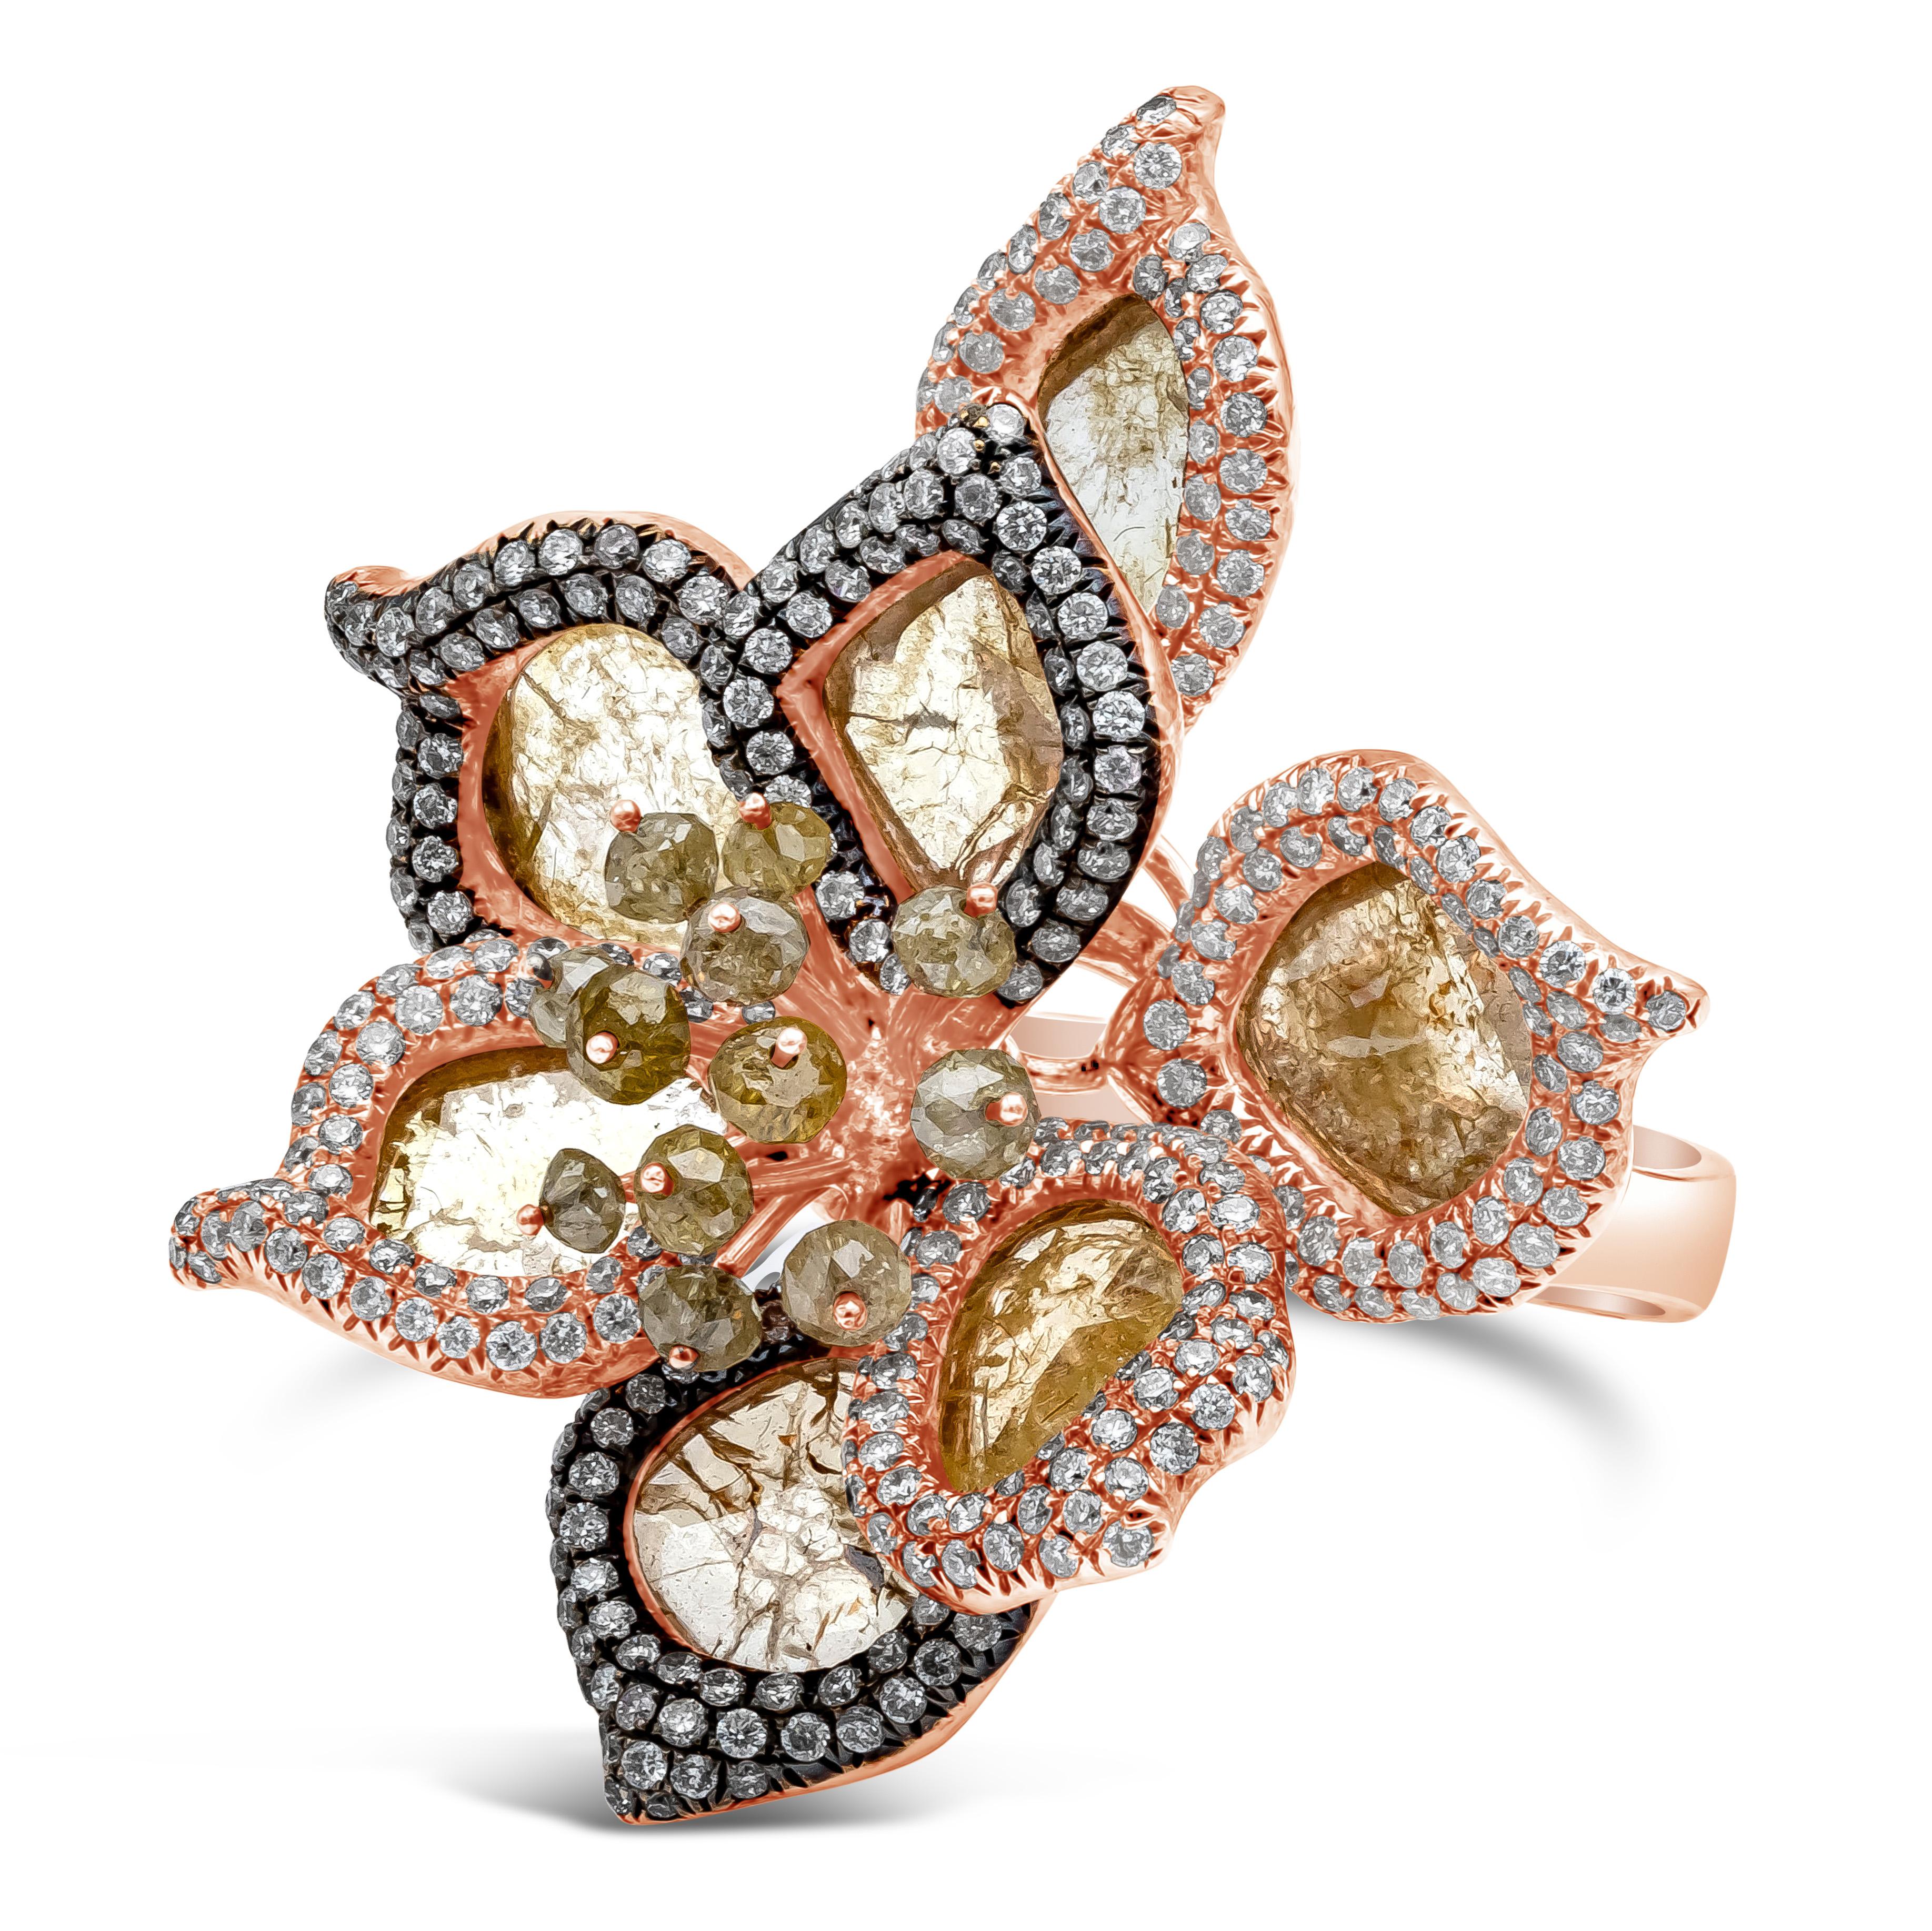 A beautiful and stylish fashion ring showcasing 4.79 carats total diamond sliced. Accented with 2.74 carats of round brilliant diamonds in a floral motif design. Made with 18K Rose Gold. Size 6 US

Roman Malakov is a custom house, specializing in